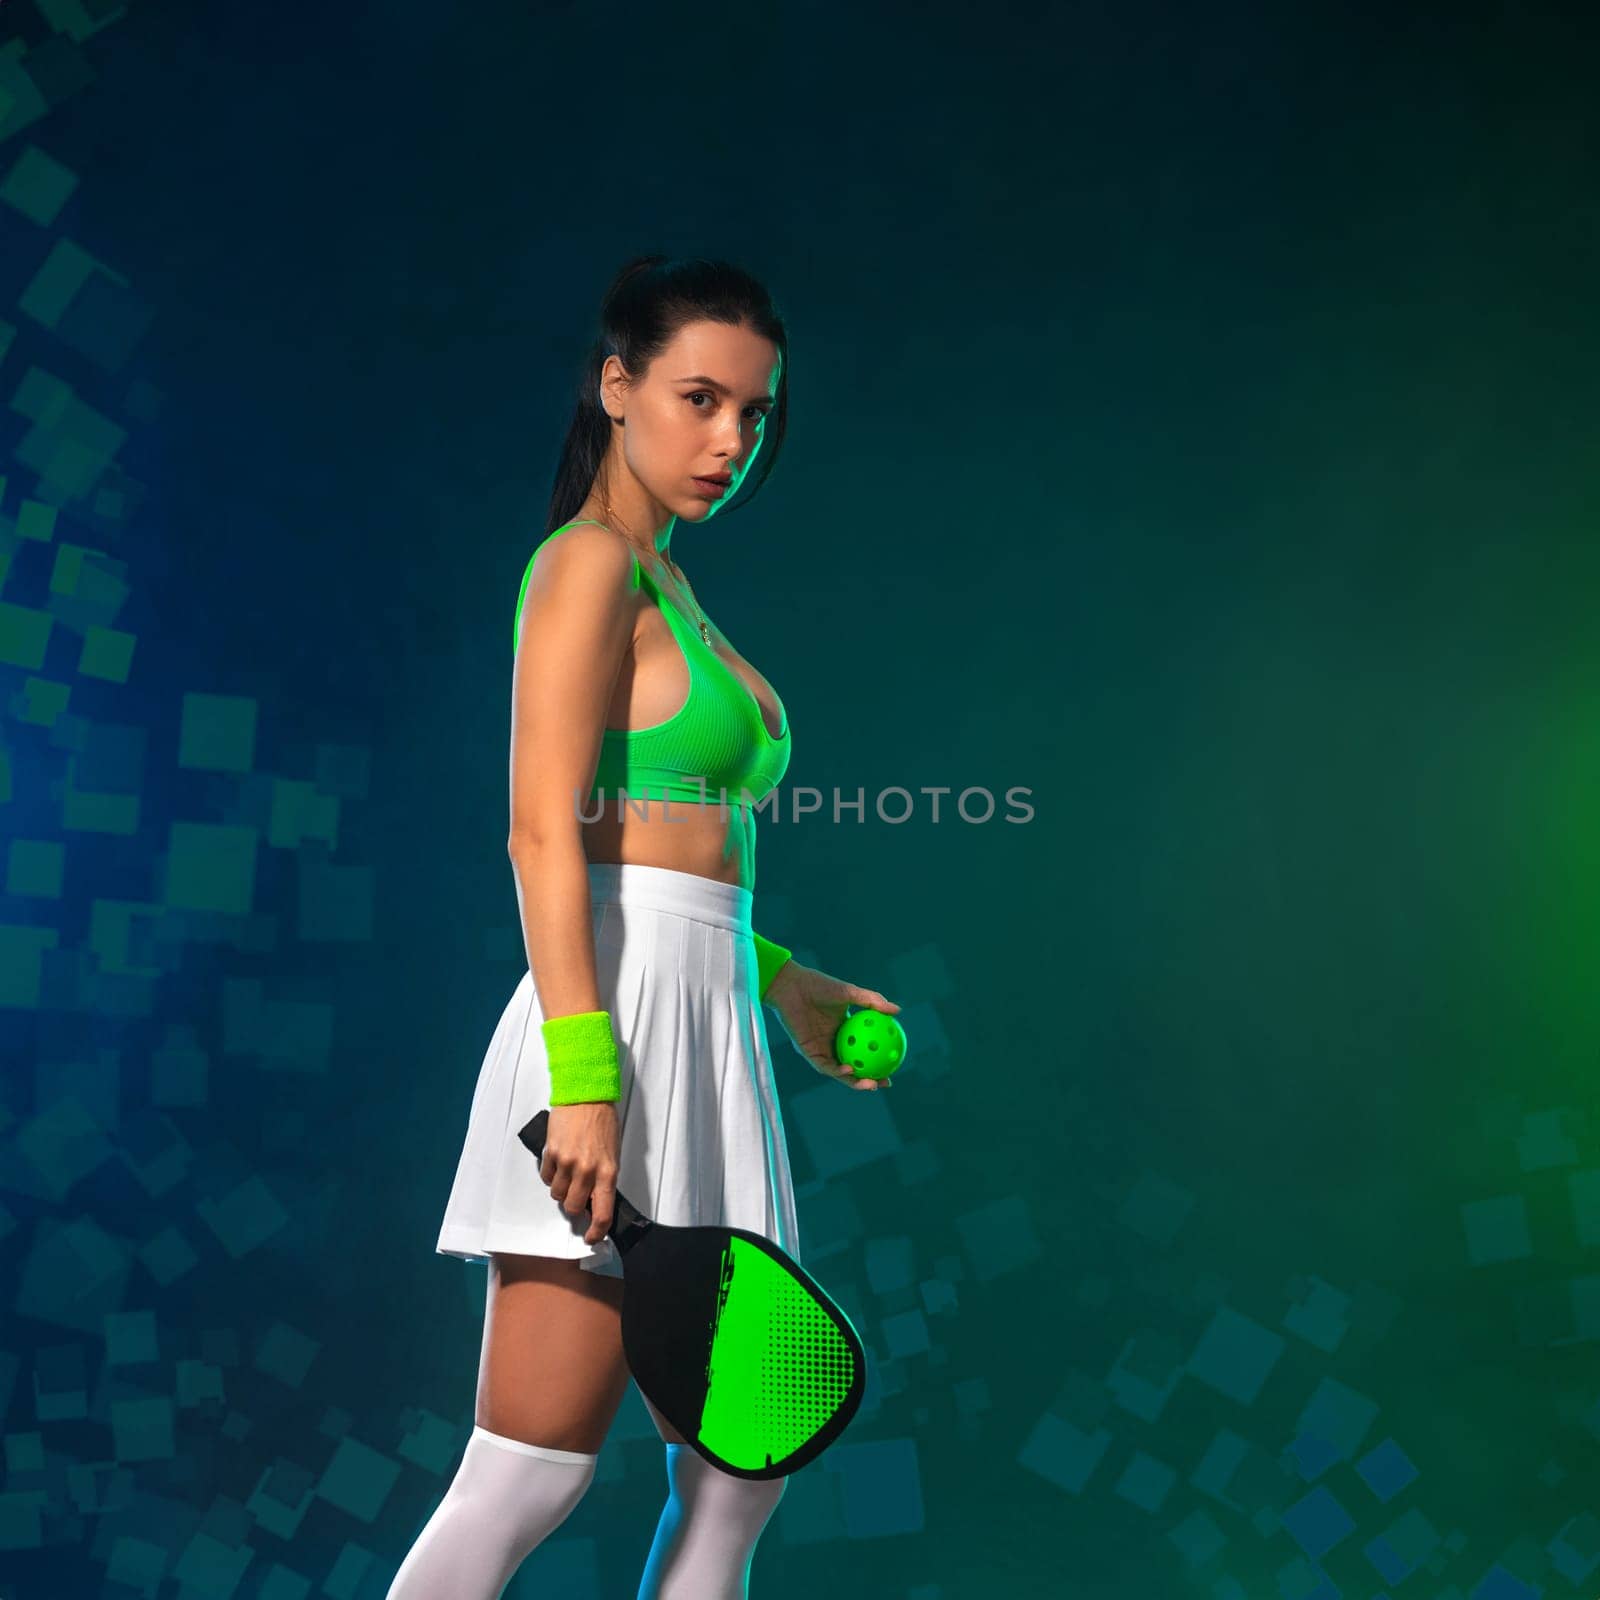 Pickleball tennis player with racket on the court. Sport court and balls. Download a high quality photo with paddle for the design of a sports app or social media advertisement